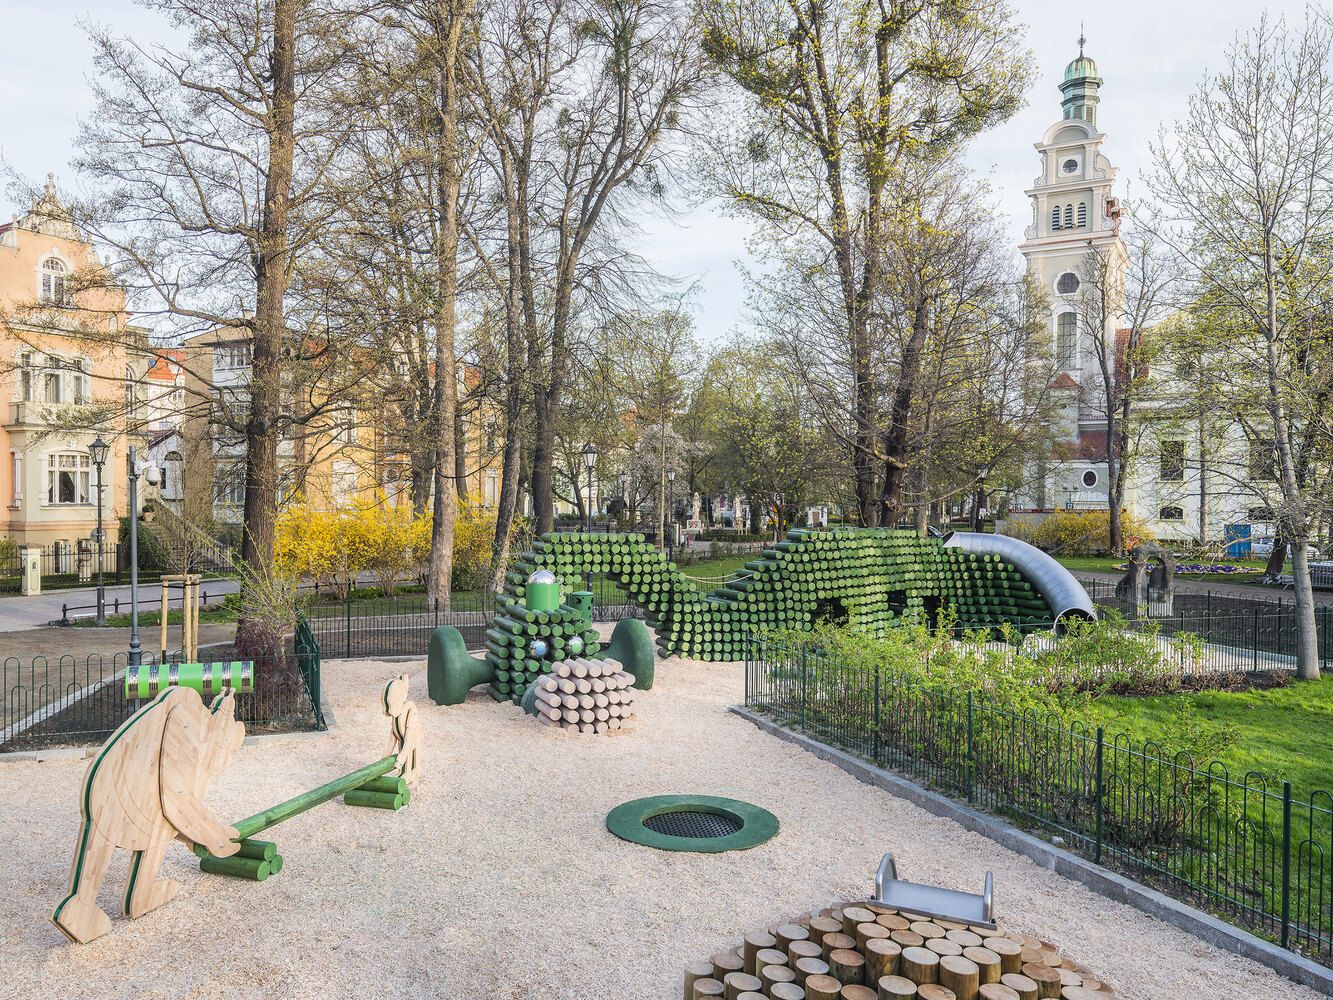 A popular Polish comics' characters come to life on this special playground!